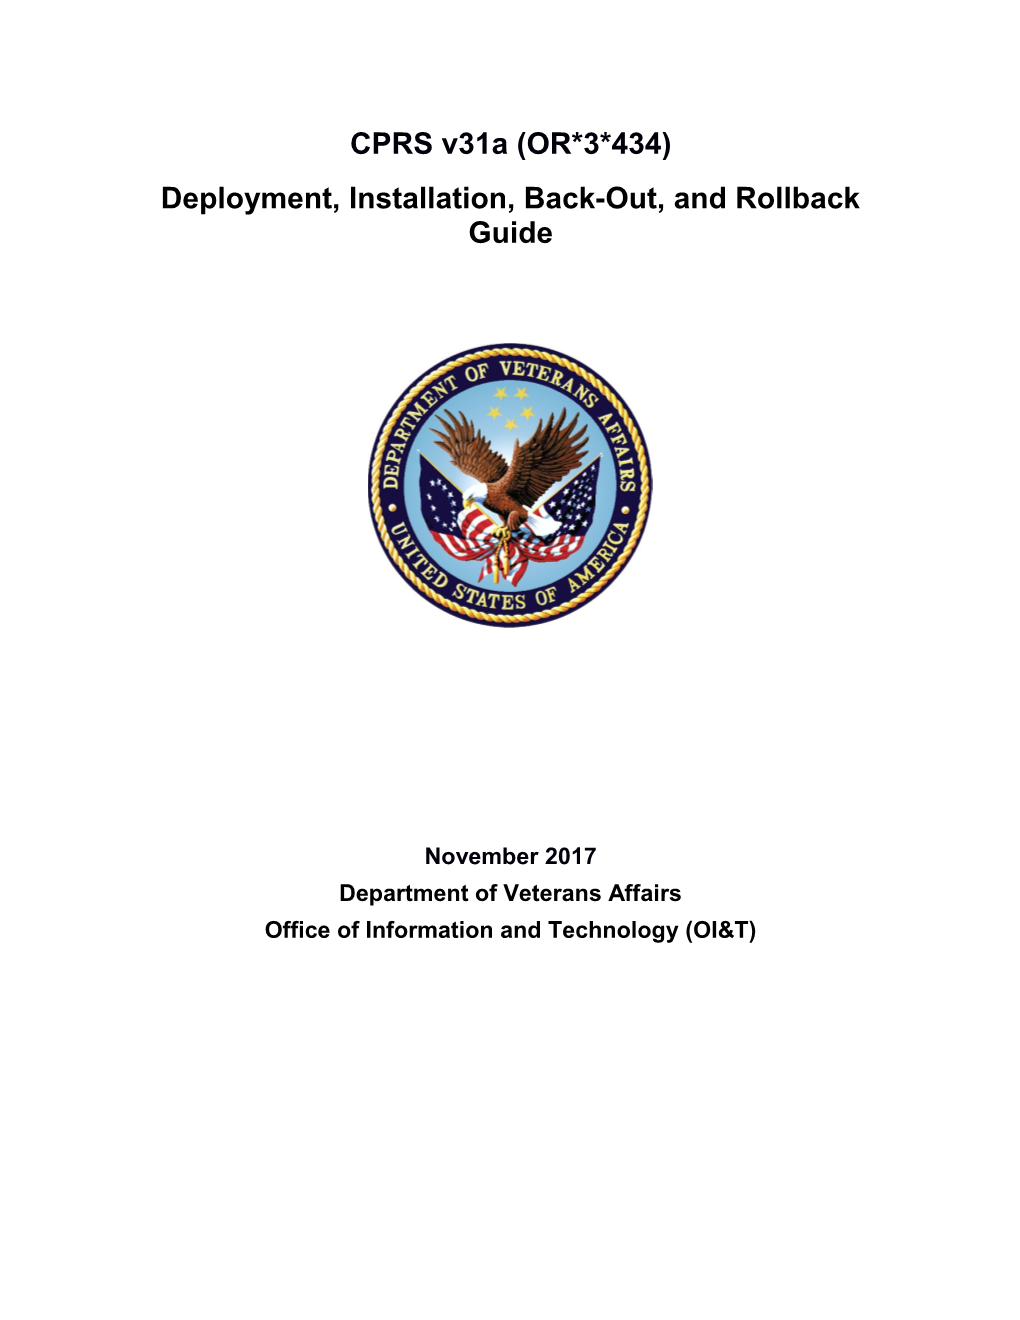 Installation, Back-Out, and Rollback Guide Template